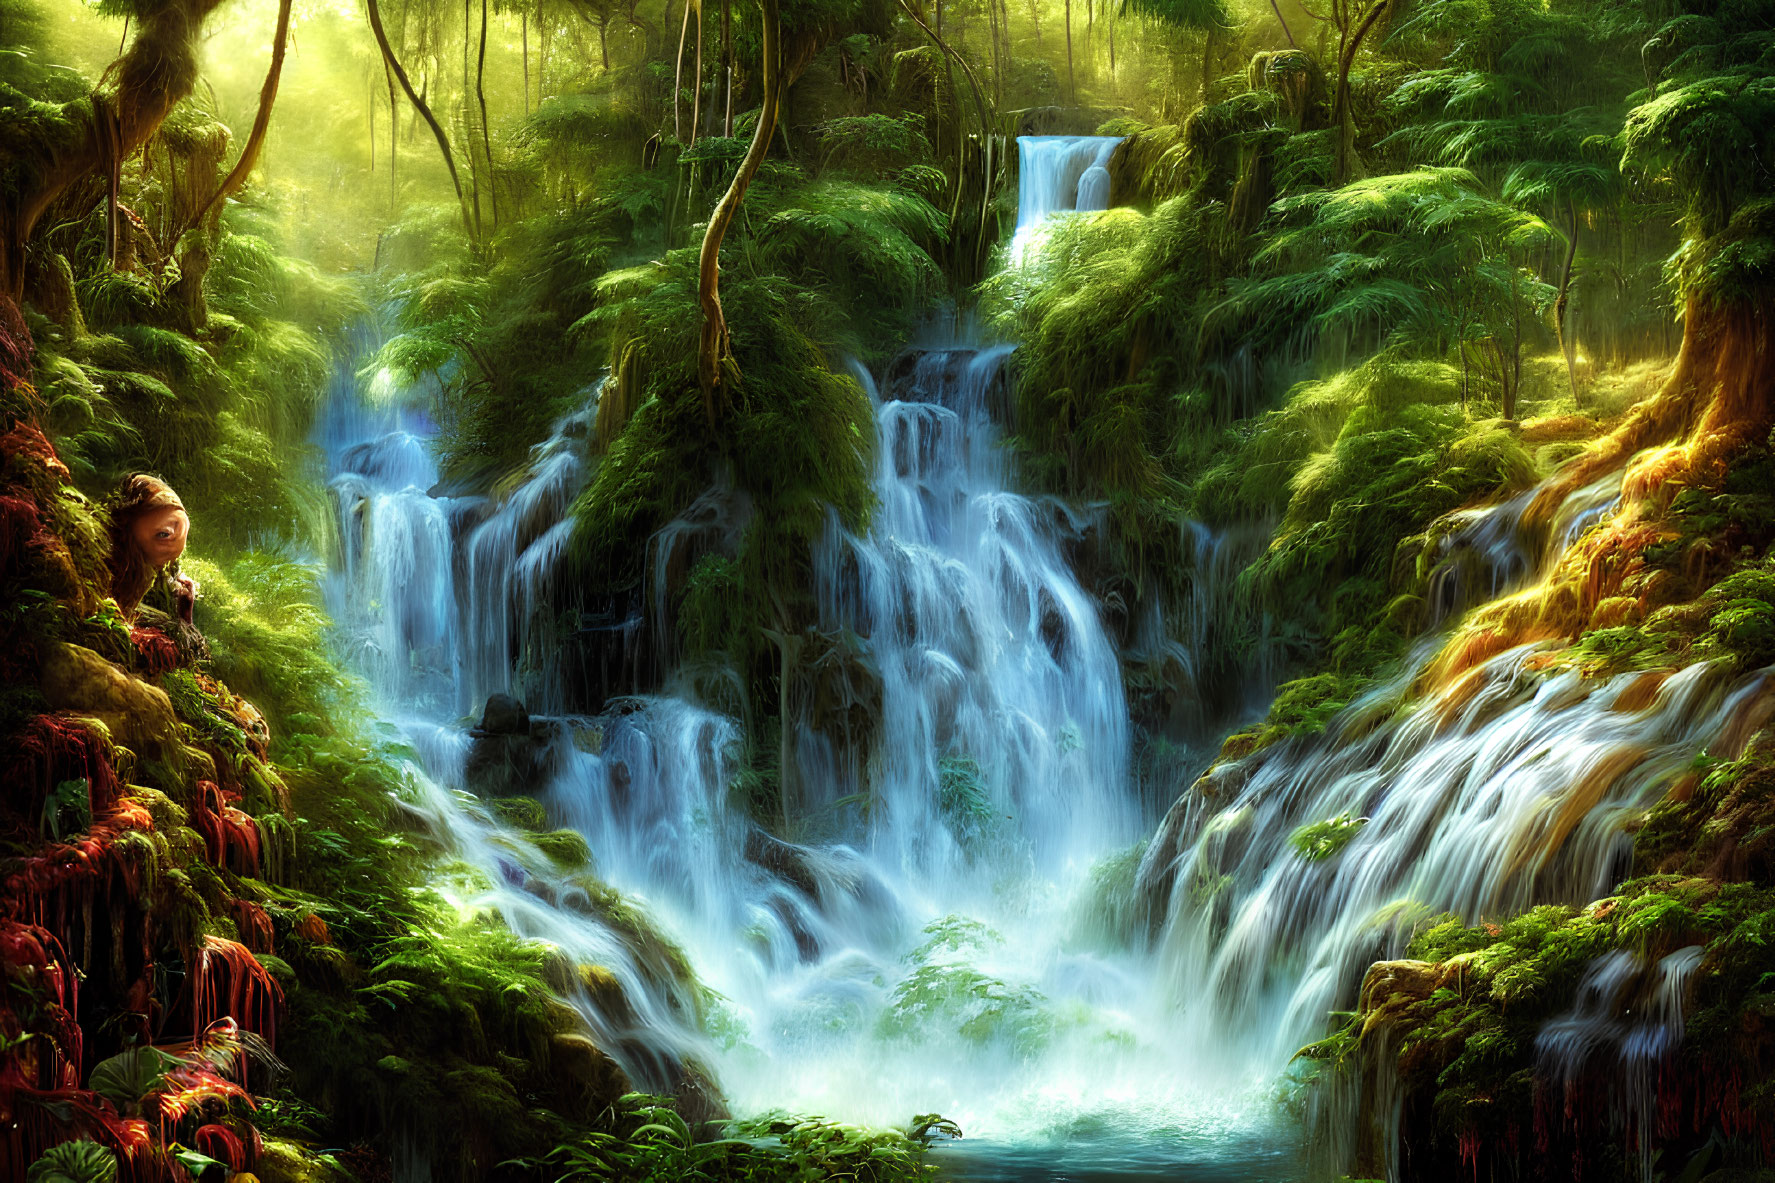 Green forest with sunlight, waterfall, moss & foliage